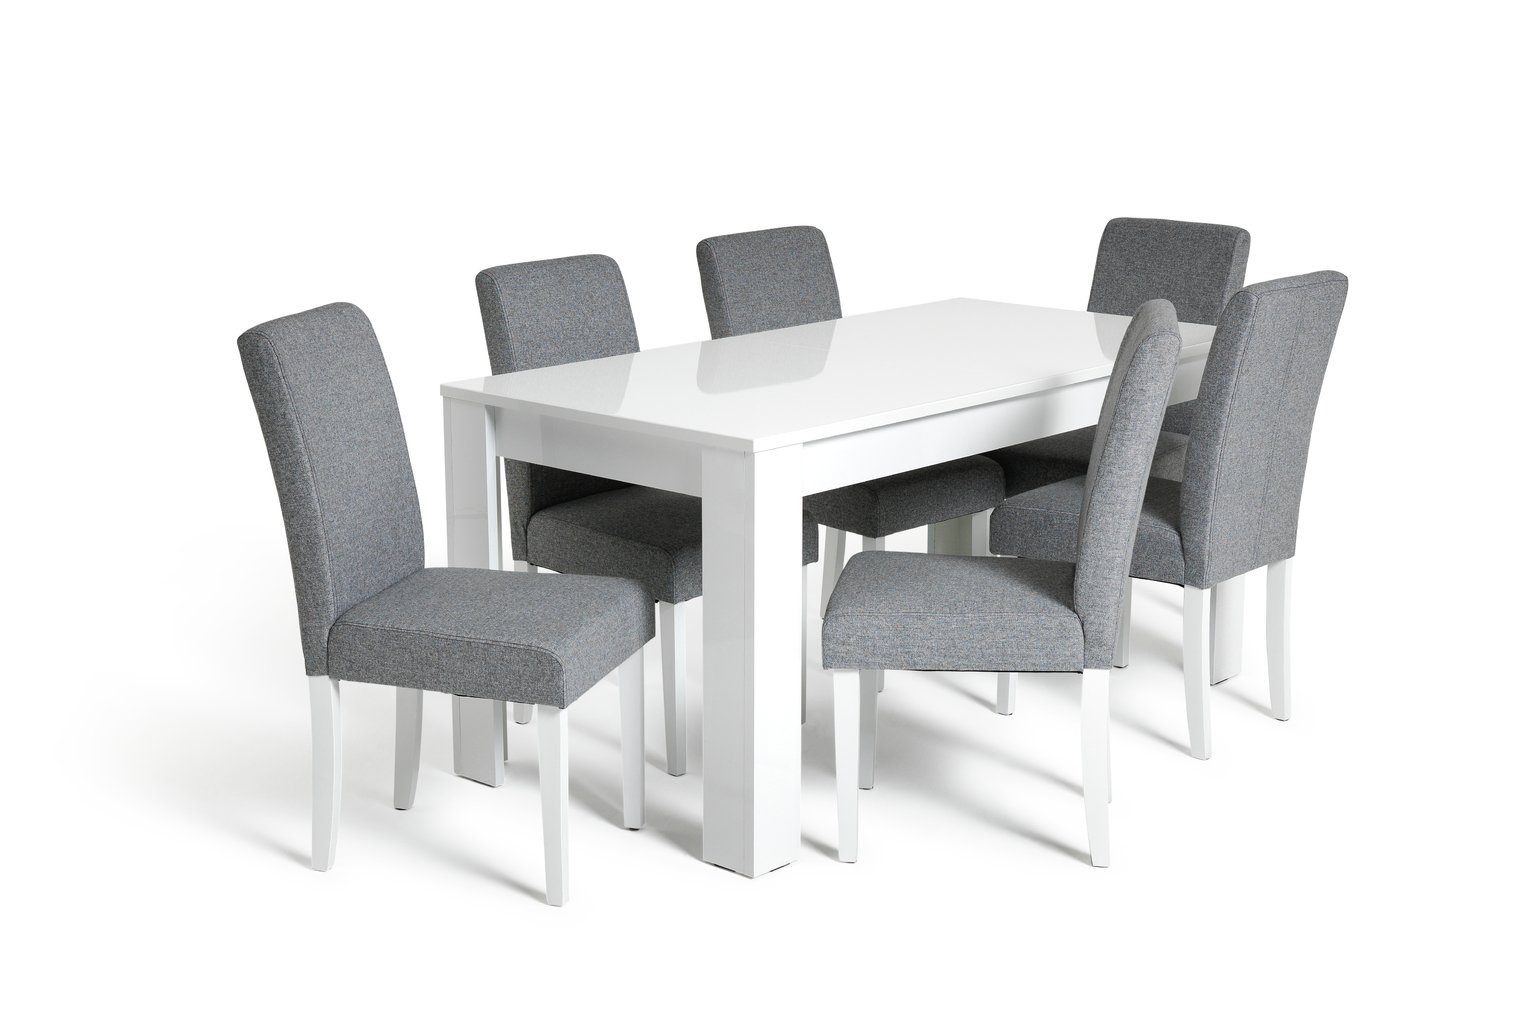 Argos Home Miami Wood Extending Dining Table & 6 Grey Chairs